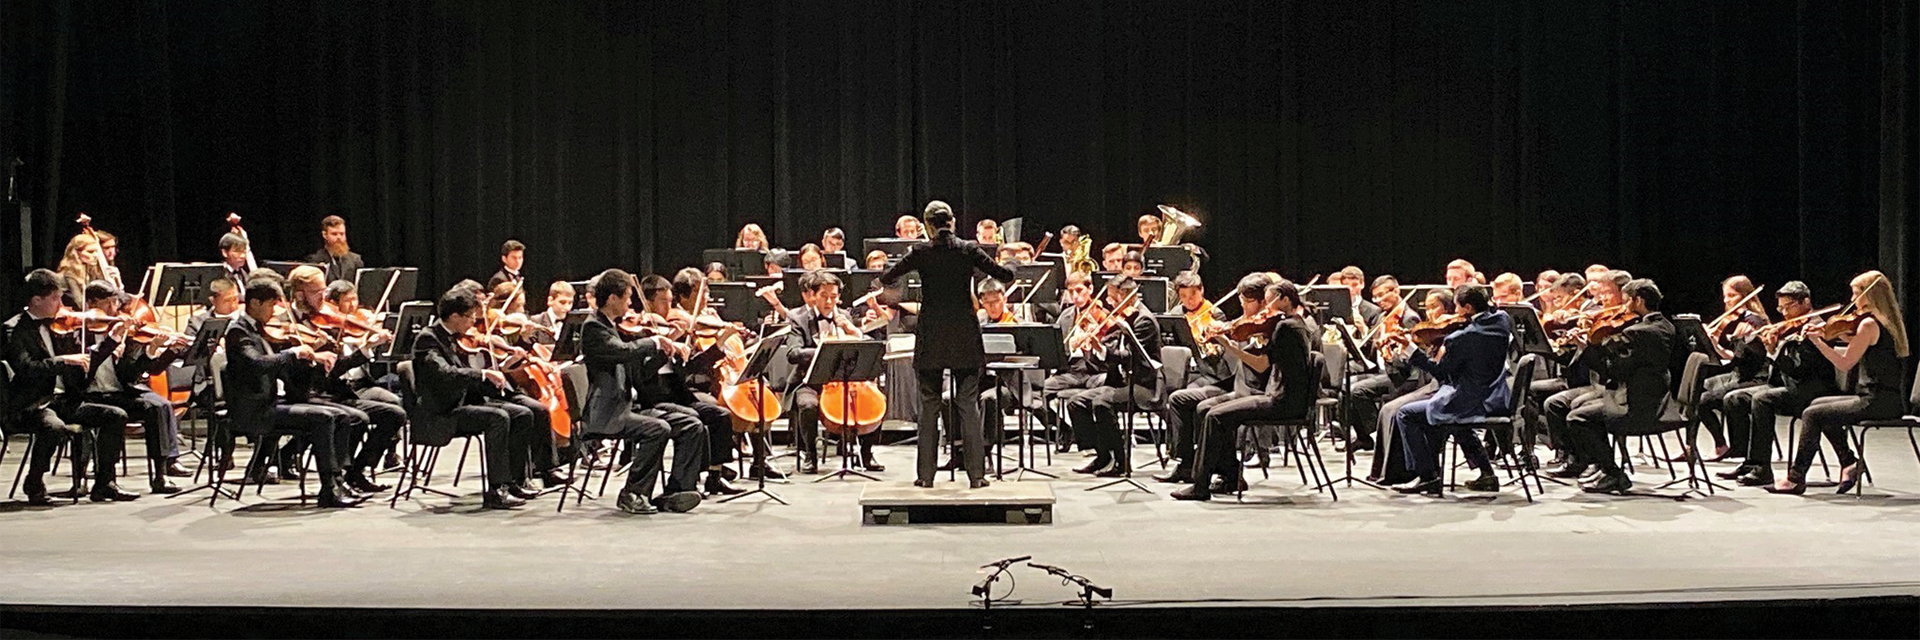 GT Orchestra Performing at the Ferst Center